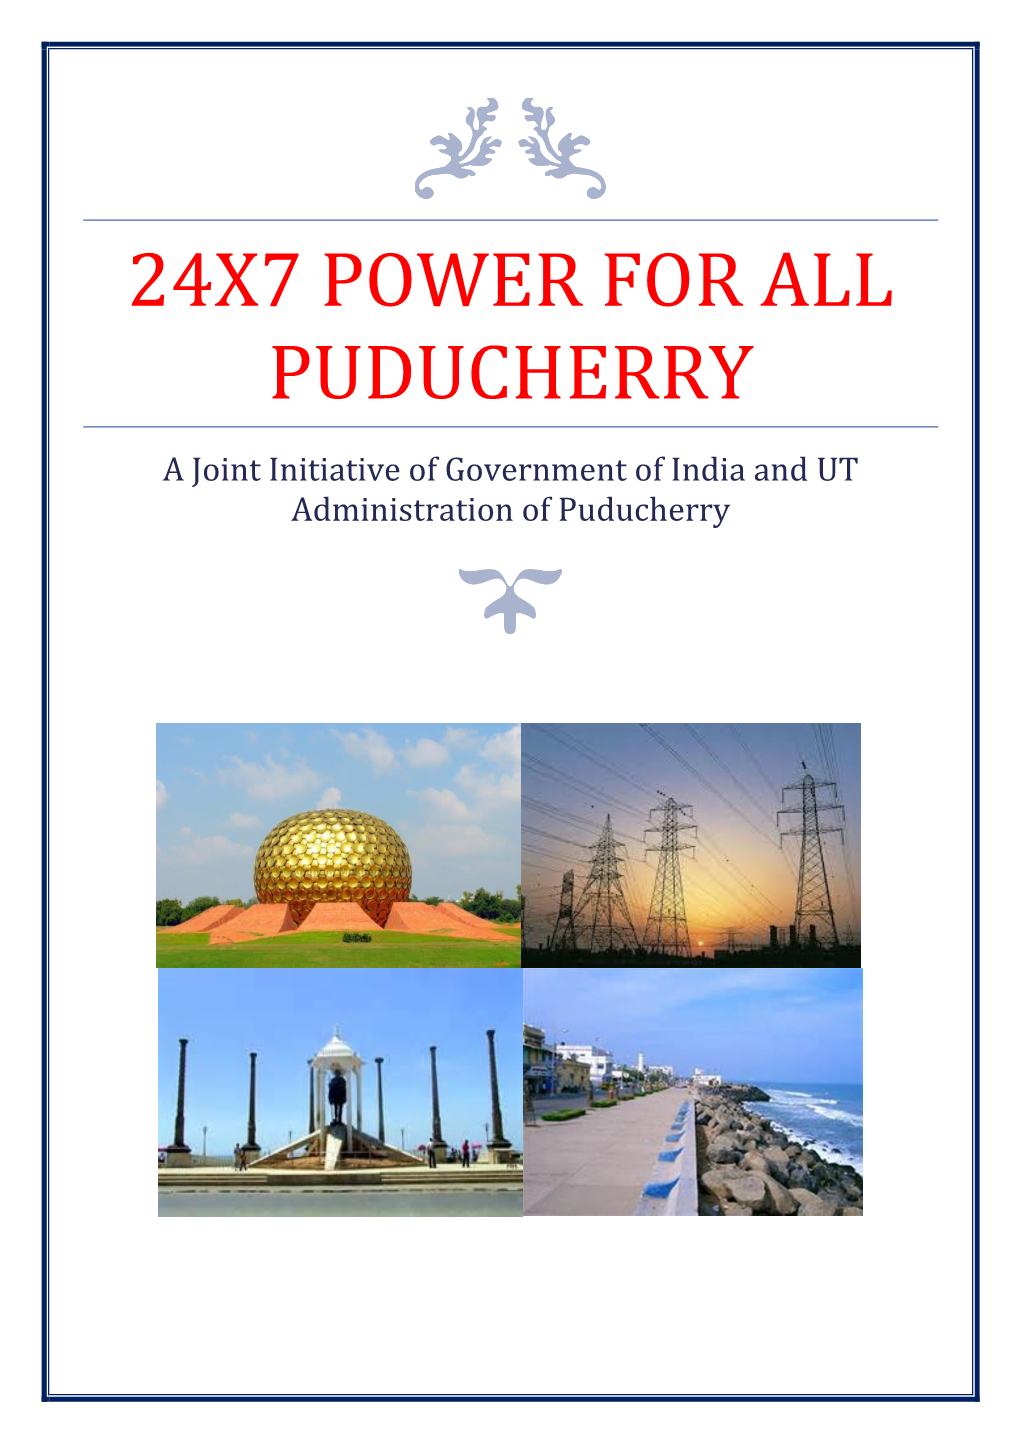 24X7 Power for All Puducherry